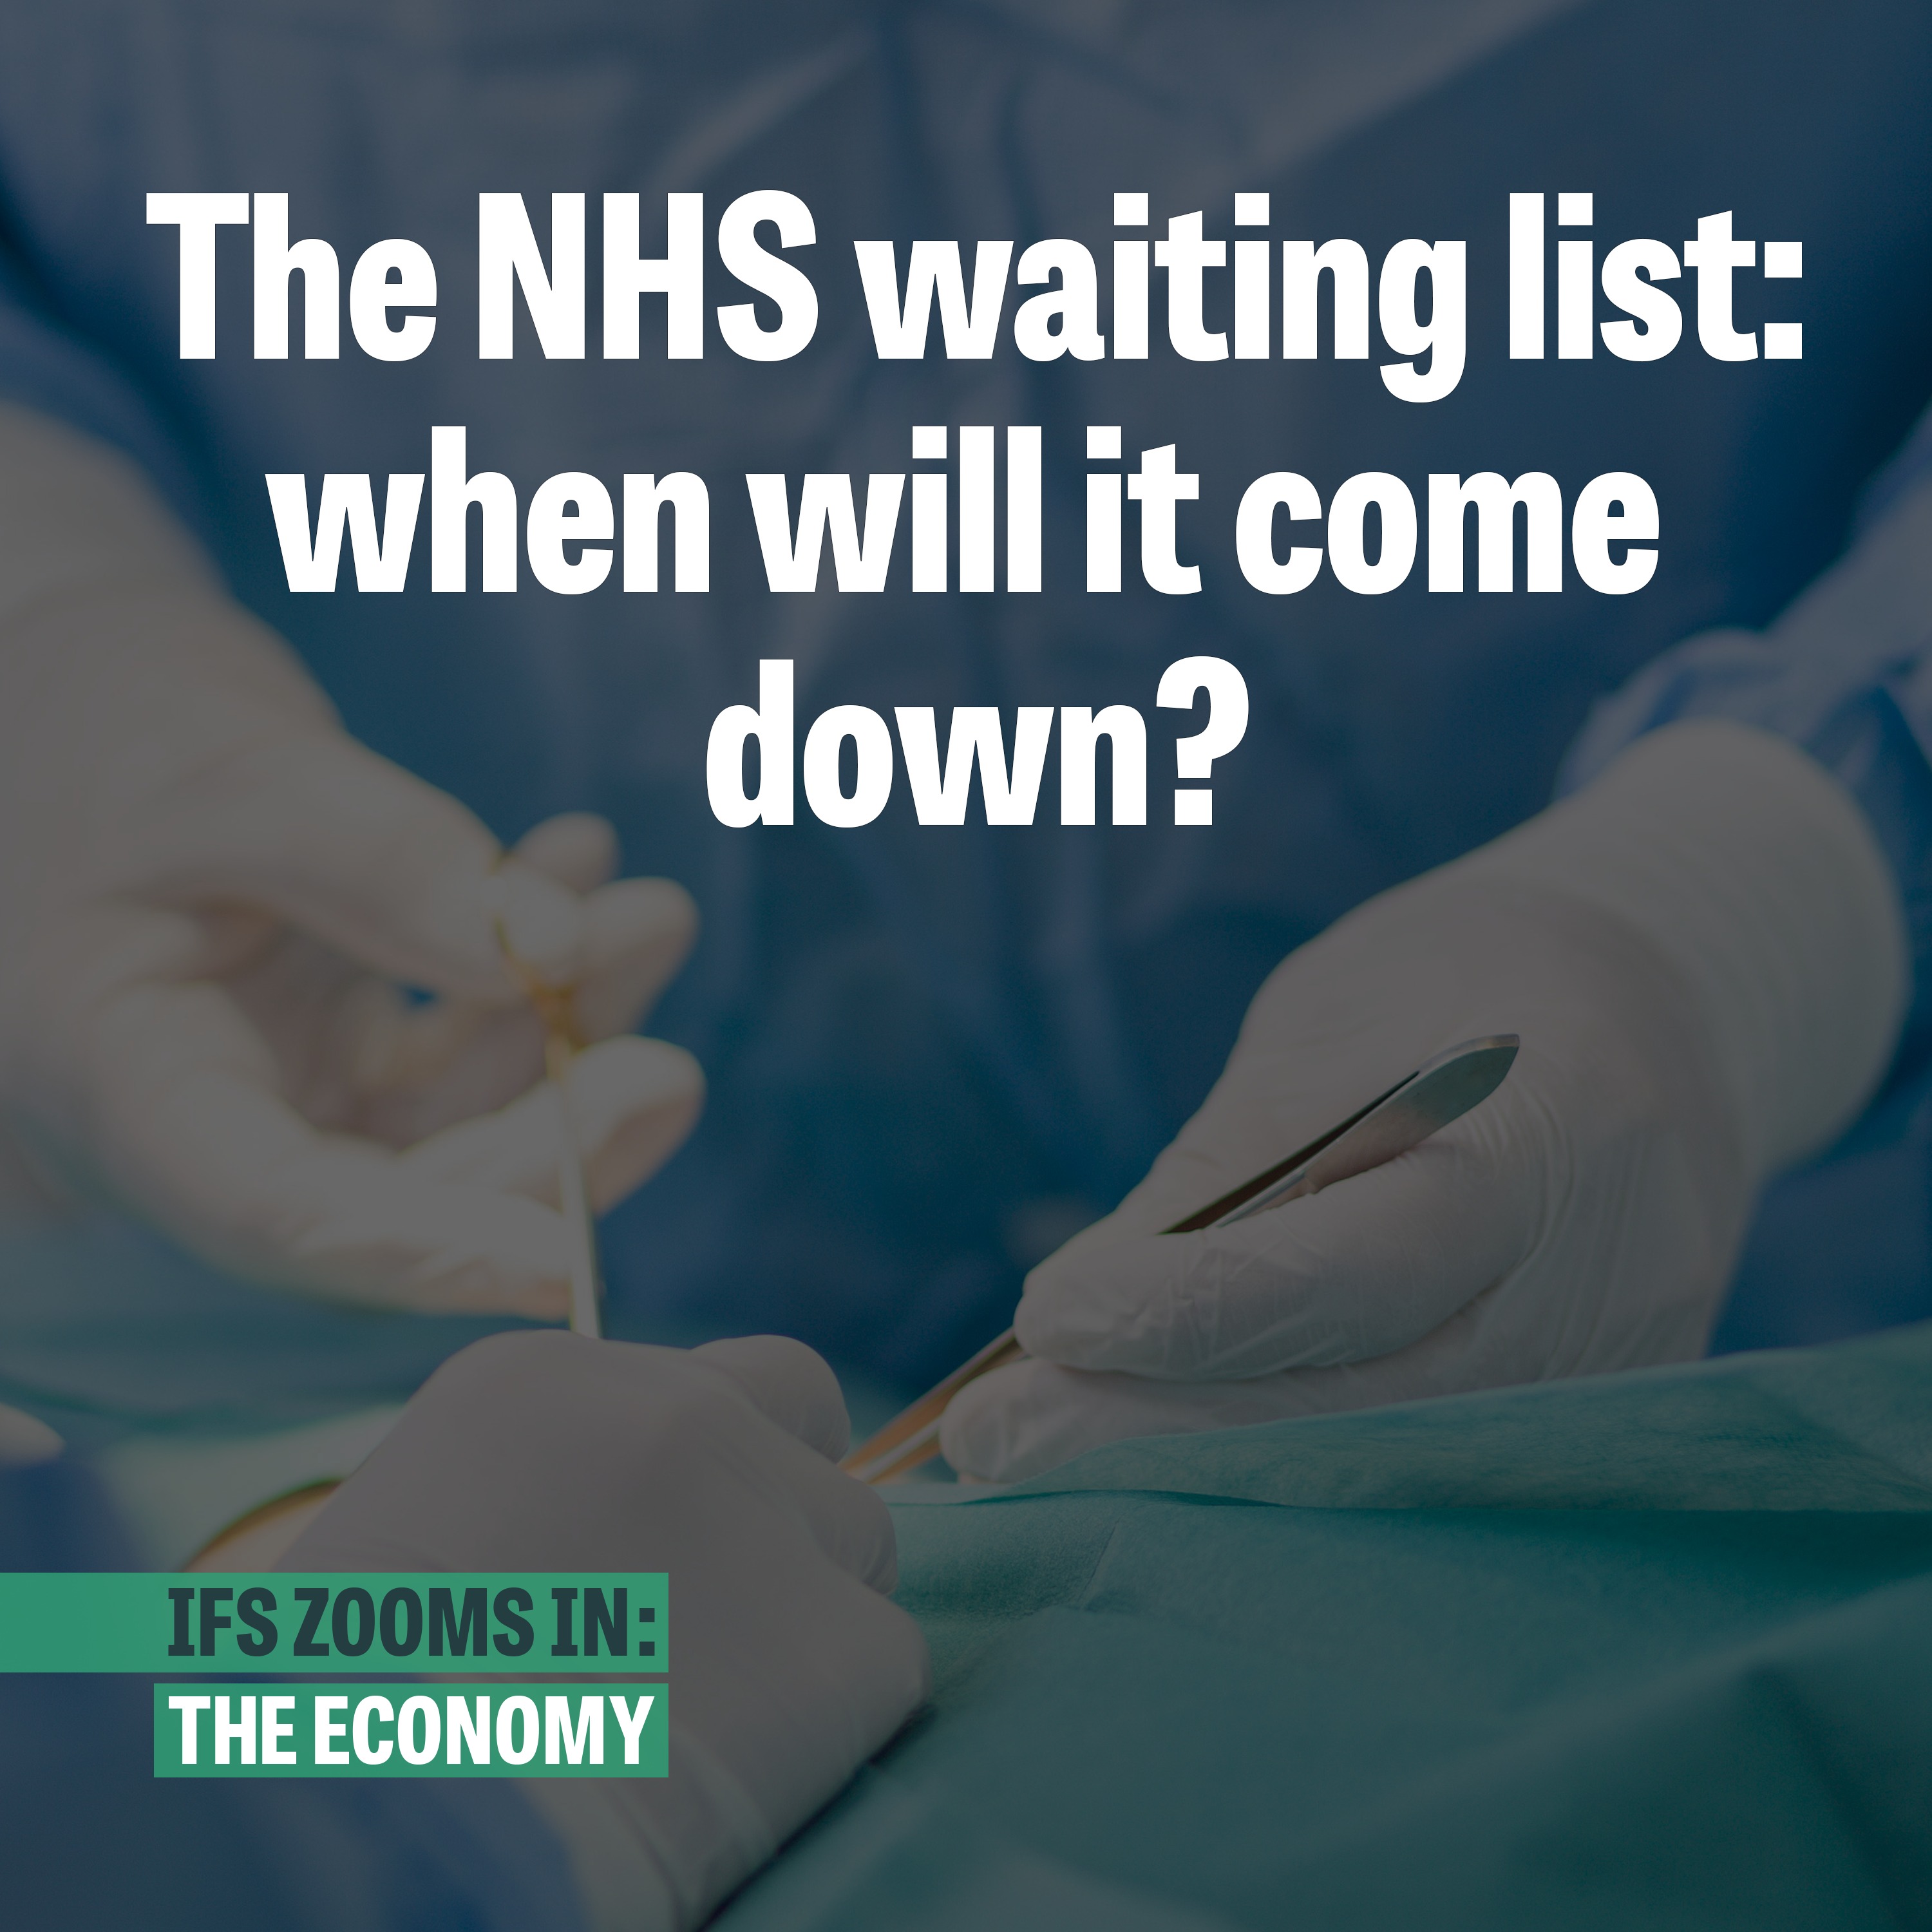 The NHS waiting list: when will it come down?